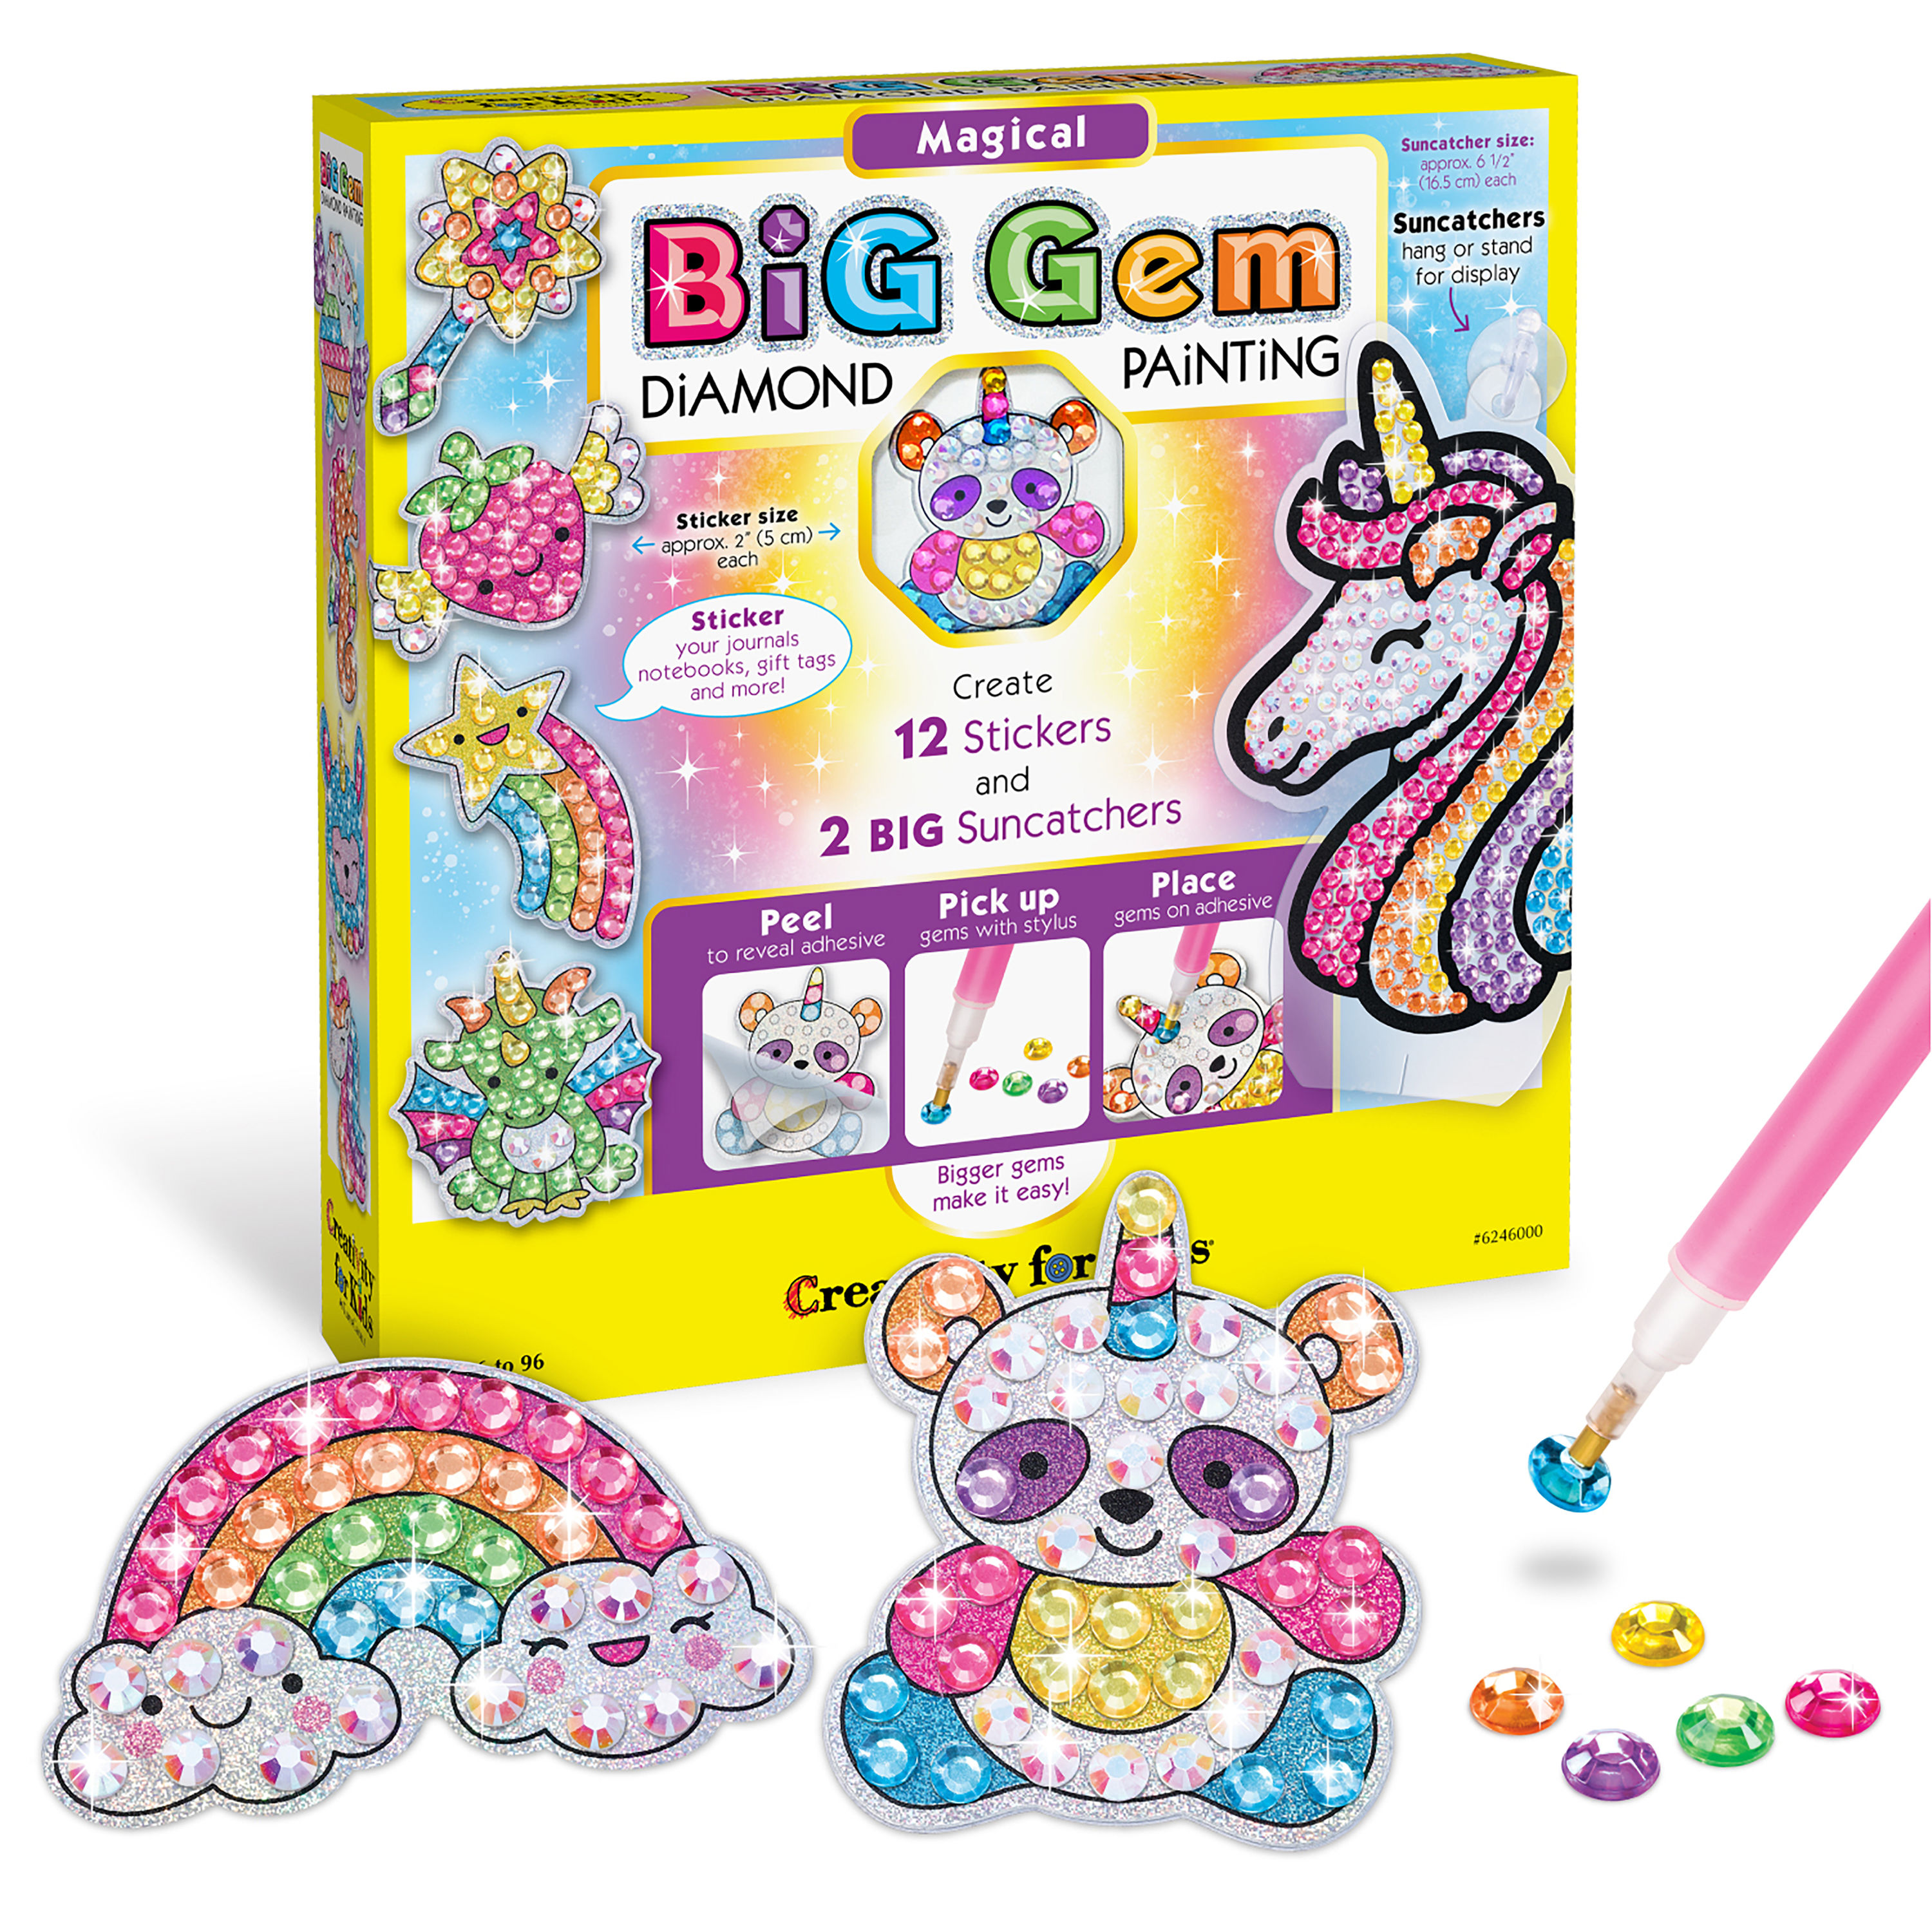  Bingo Castle Paint Your Own Unicorn Arts and Crafts DIY  Painting Kit for Kids Boys Girls Includes 12 Acrylic Paints, Glitter Glue,  Gemstones, Palette, Brushes : Toys & Games